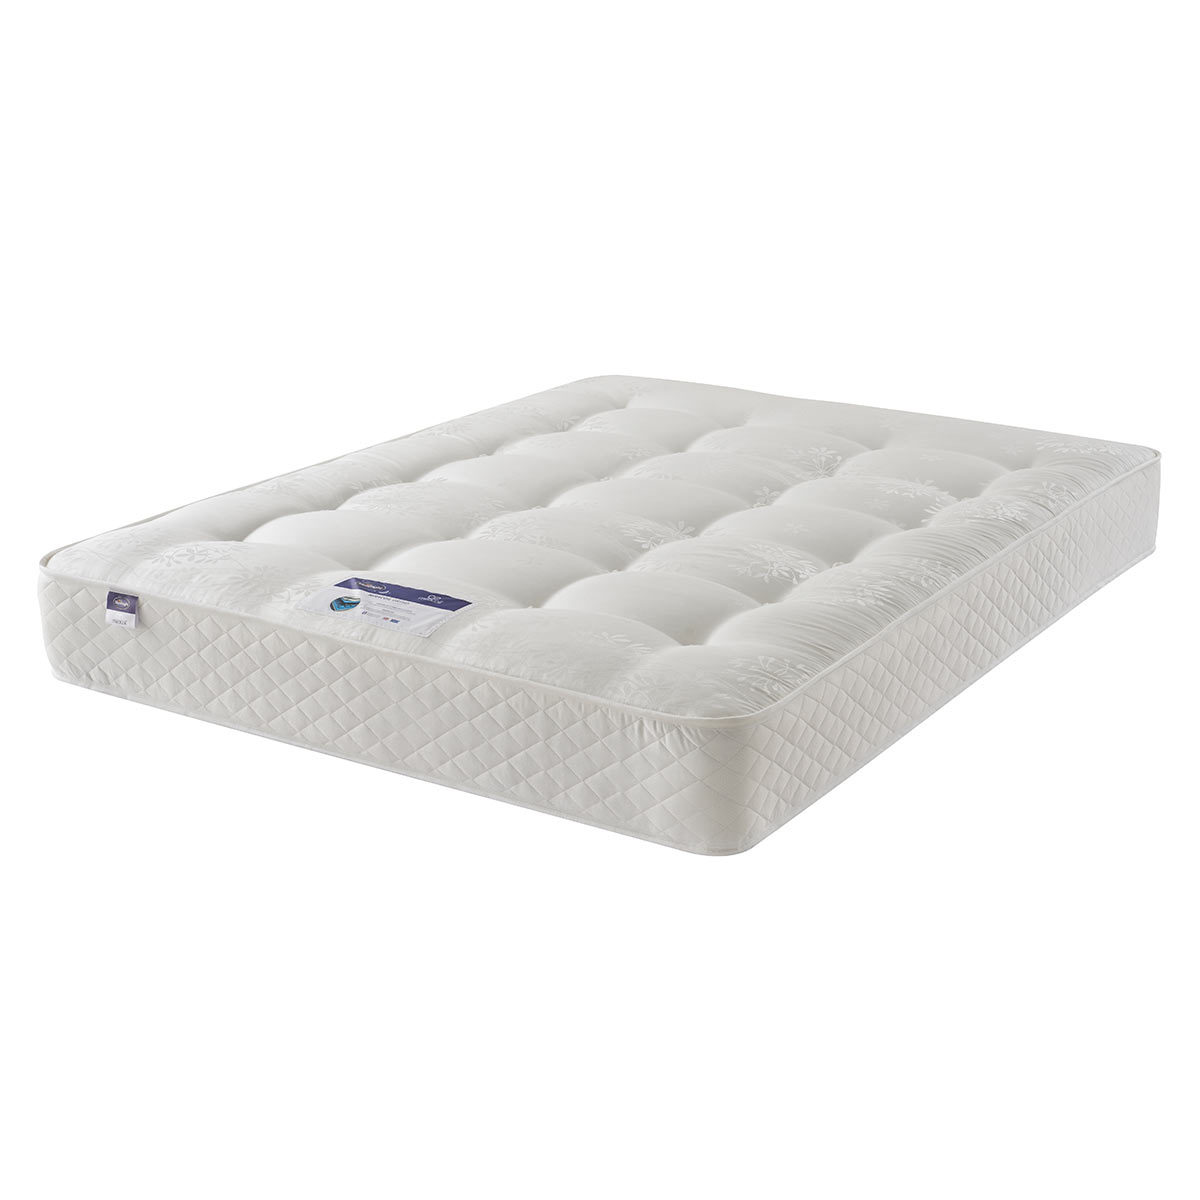 Silent Night Miracoil Ortho Mattress King Size